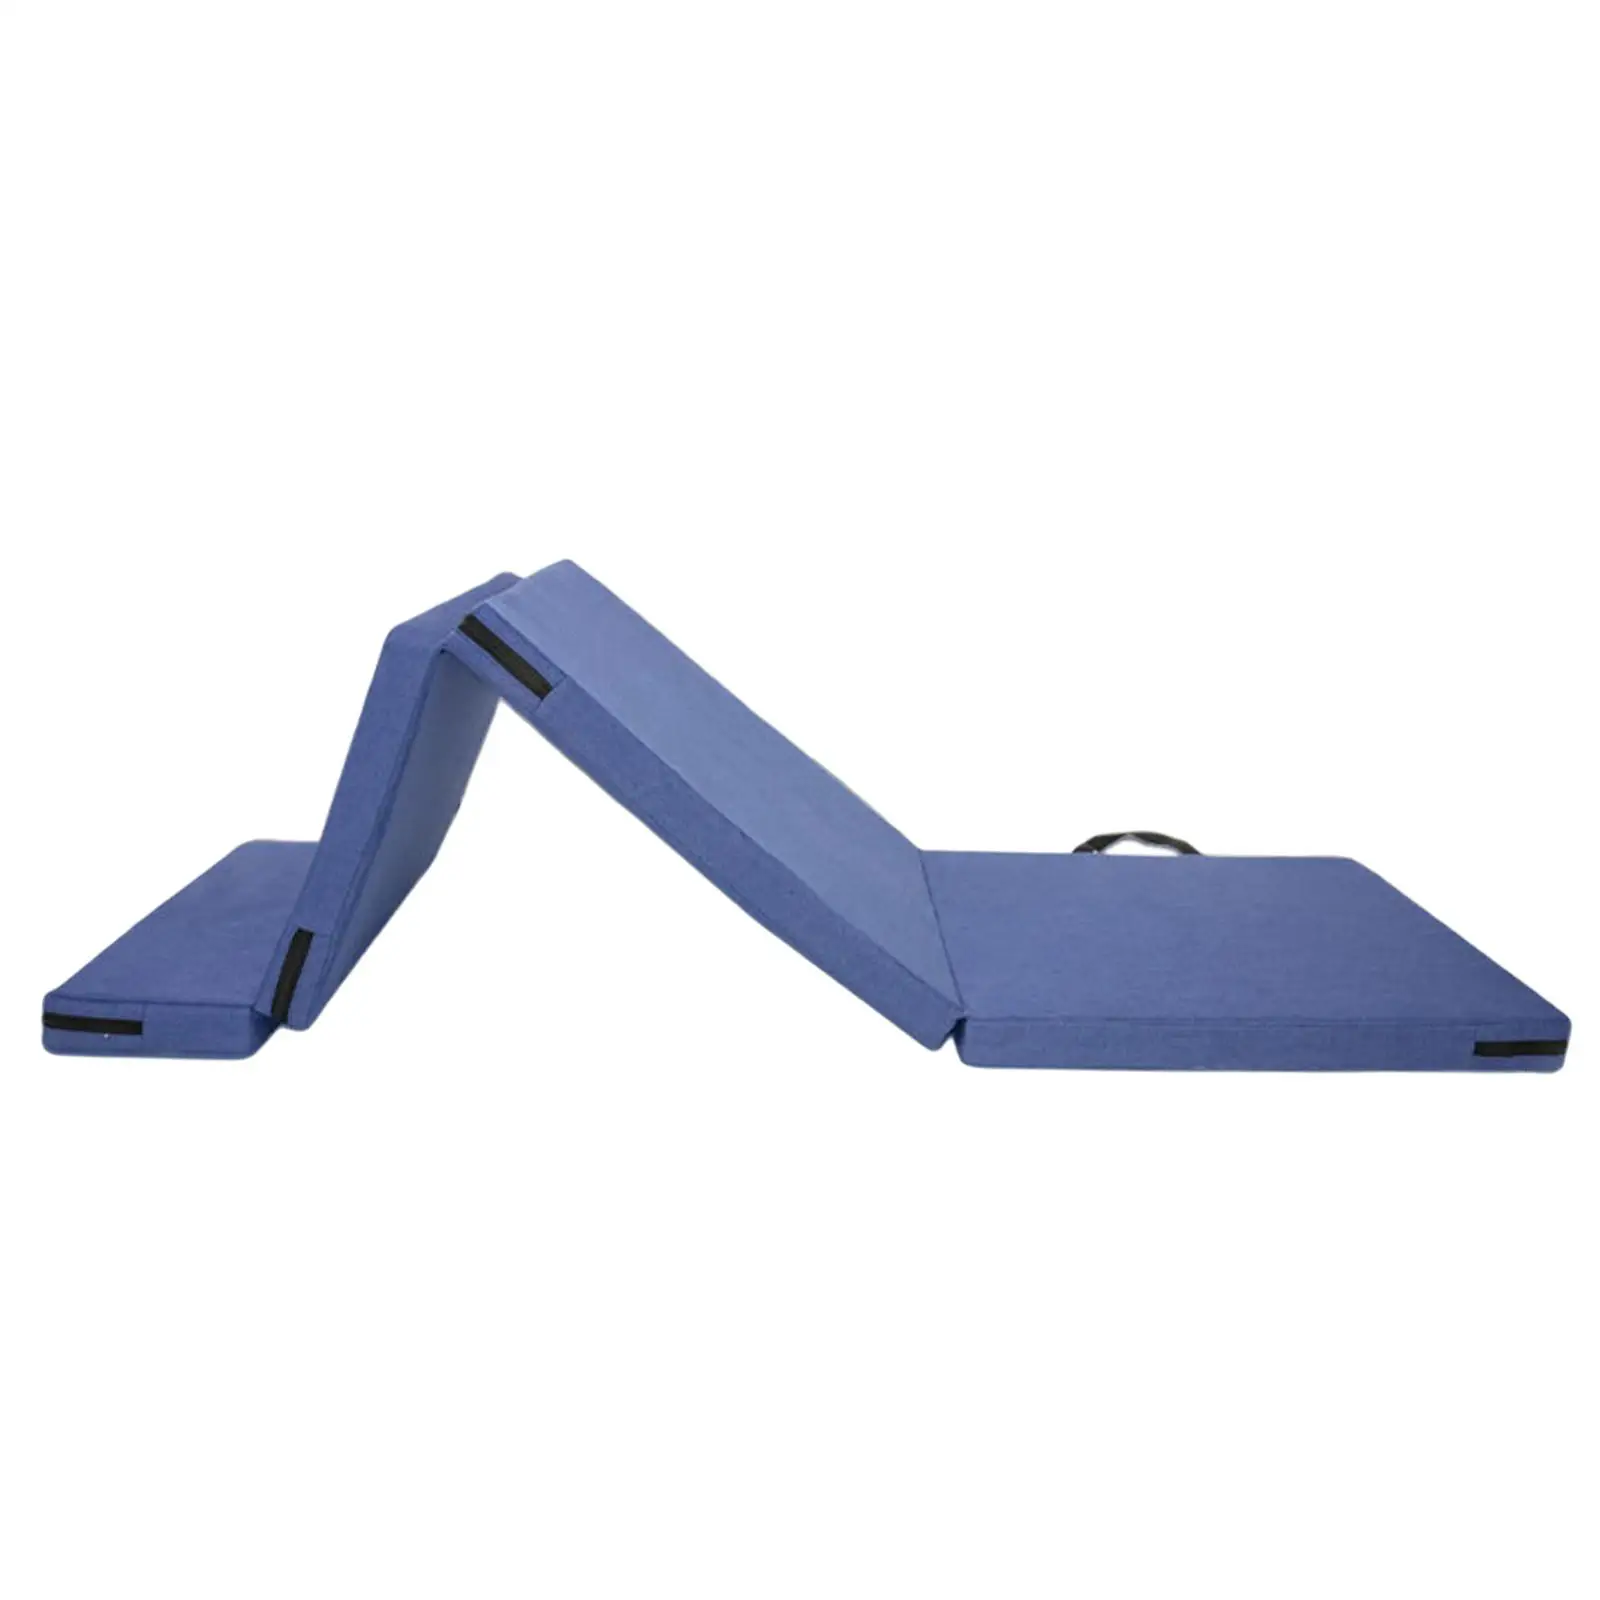 Folding Thick Exercise Mat Non Slip with Carrying Handles Gymnastics Mats for Pilates Training Stretching